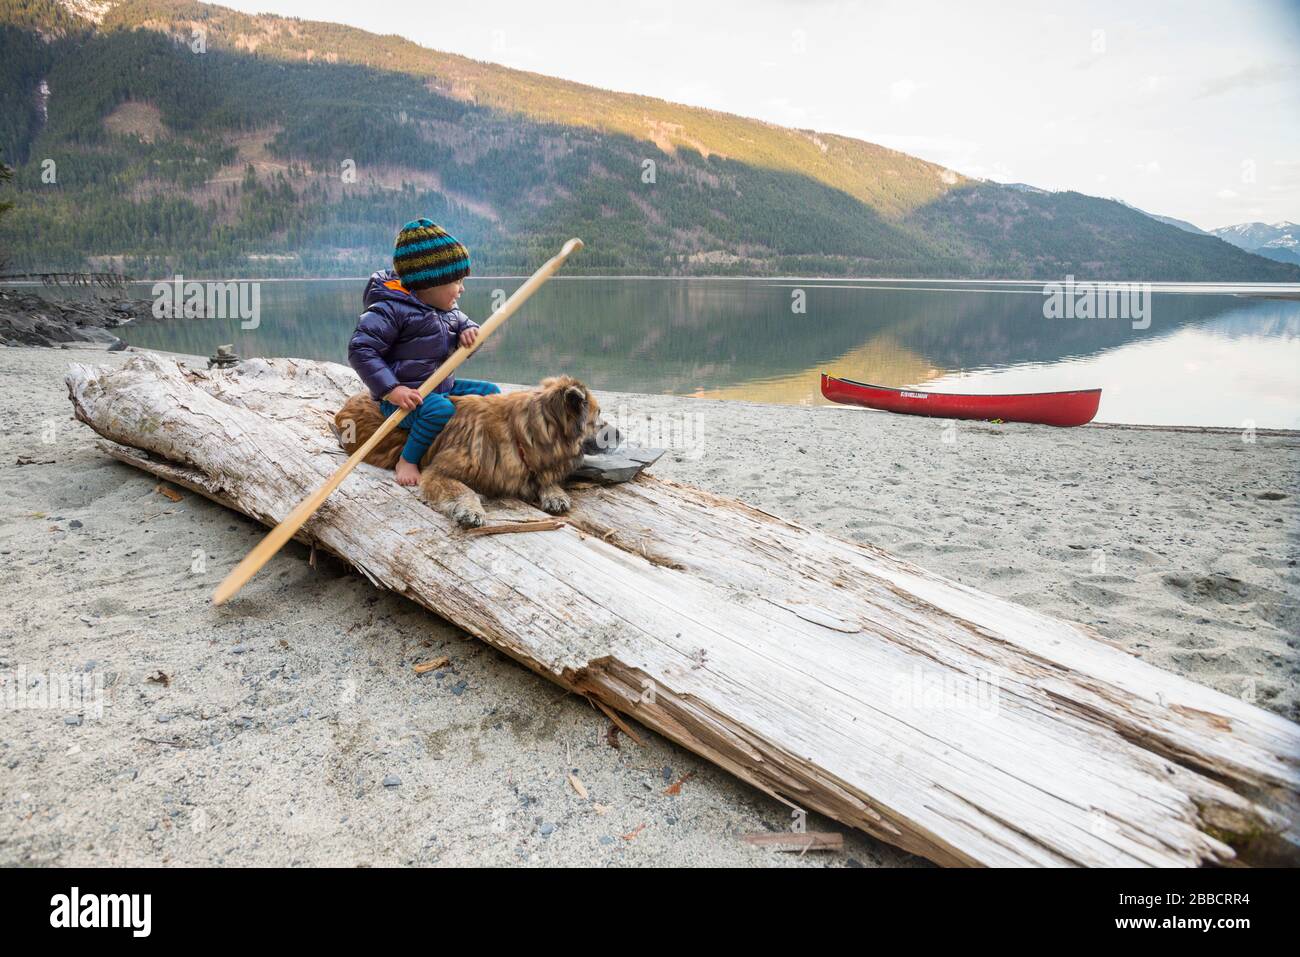 A boy and his dog messing around on Wragge beach, Slocan Lake, British Columbia Stock Photo